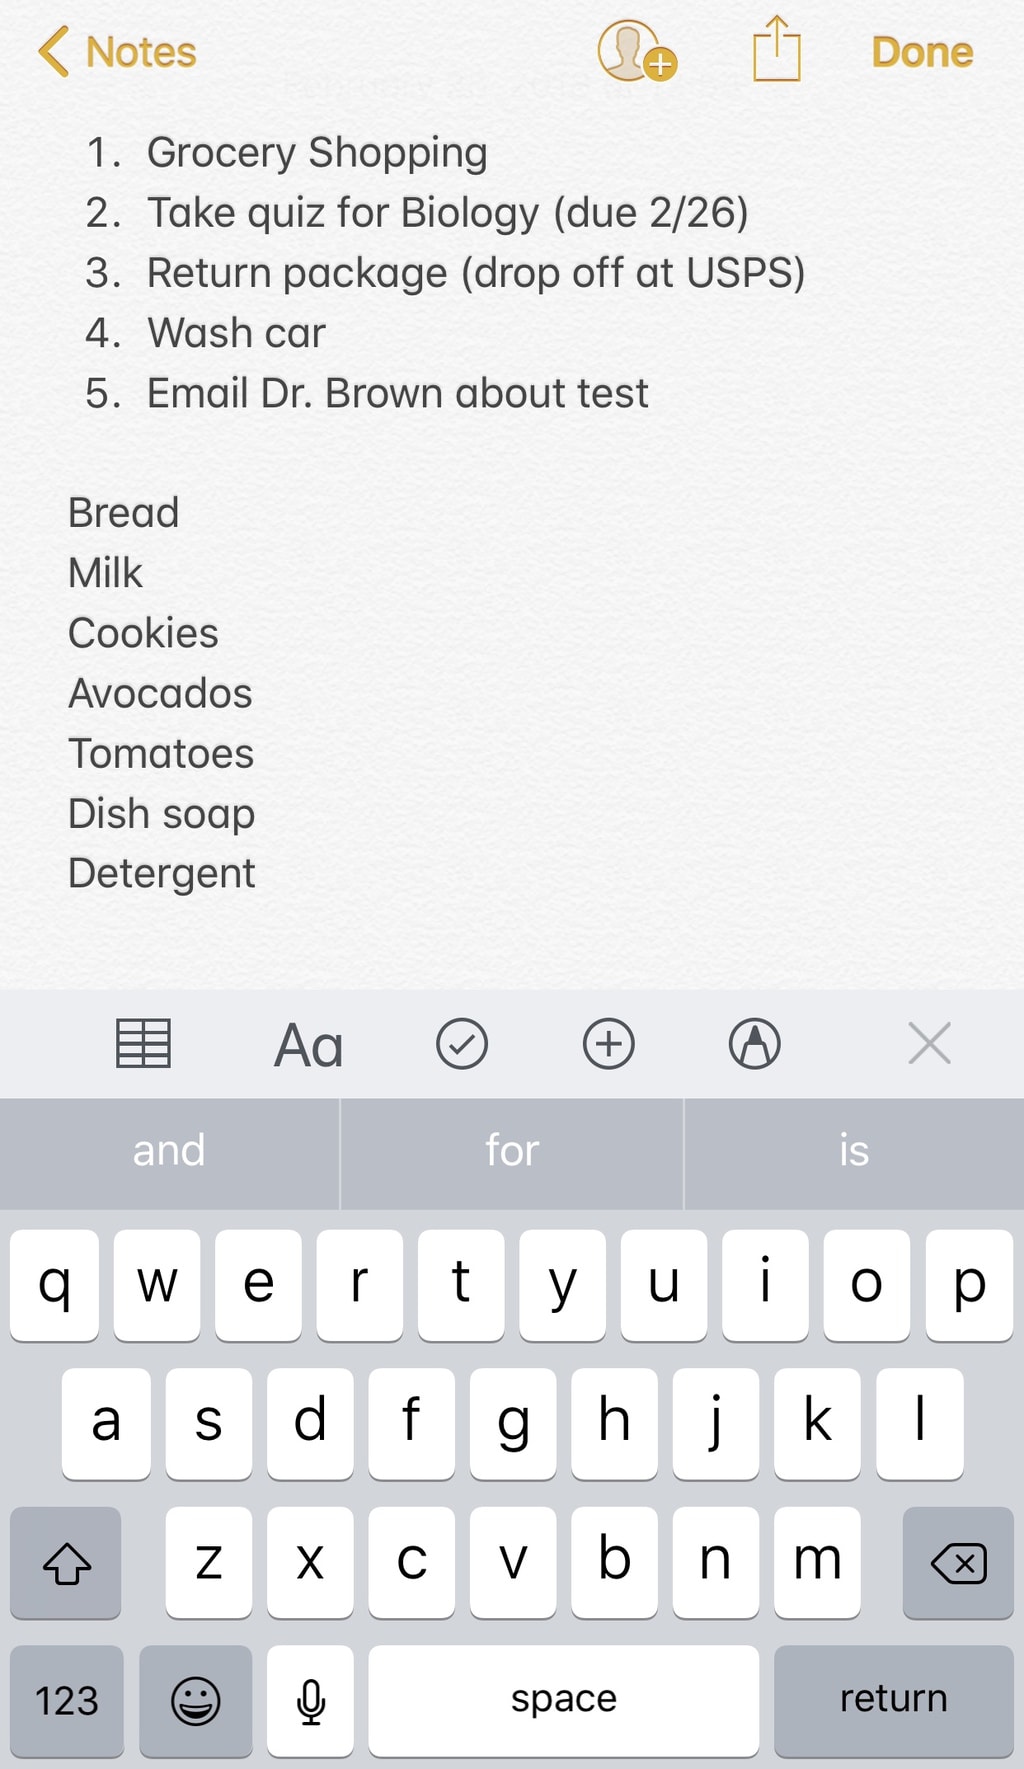 Notes App including a list of to-do items and a grocery list.